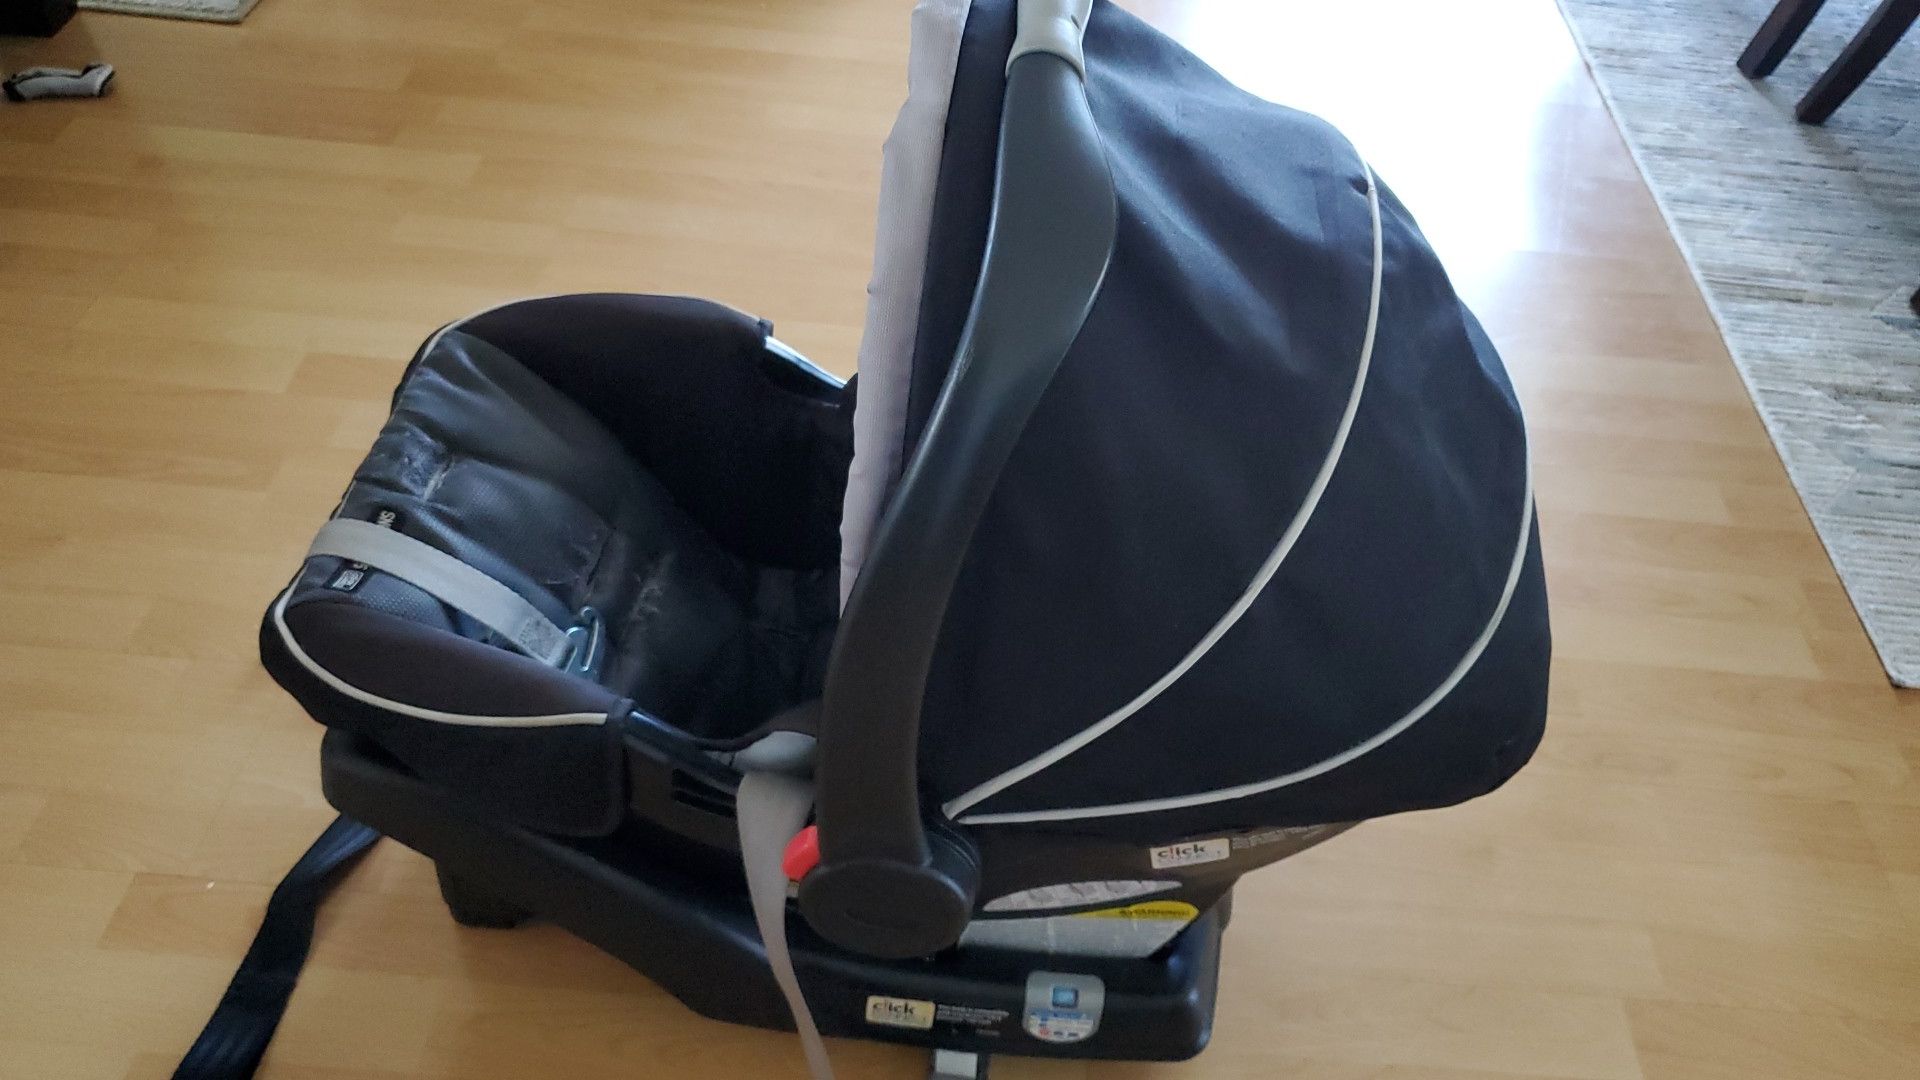 Graco click connect carseat w/base!